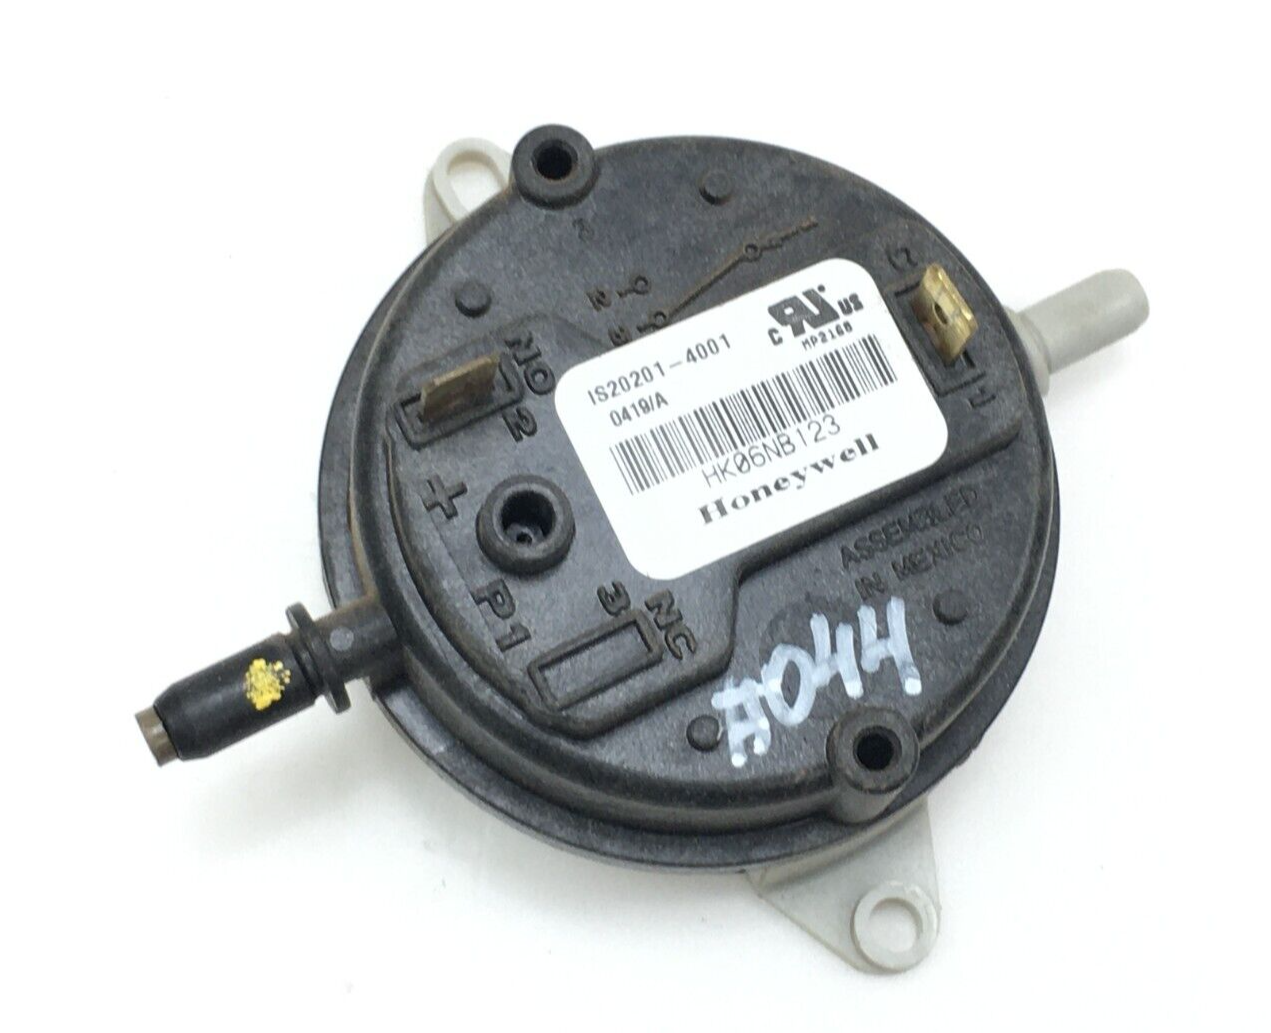 Primary image for Honeywell IS20201-4001 Air Pressure Switch HK06NB123 used #O44